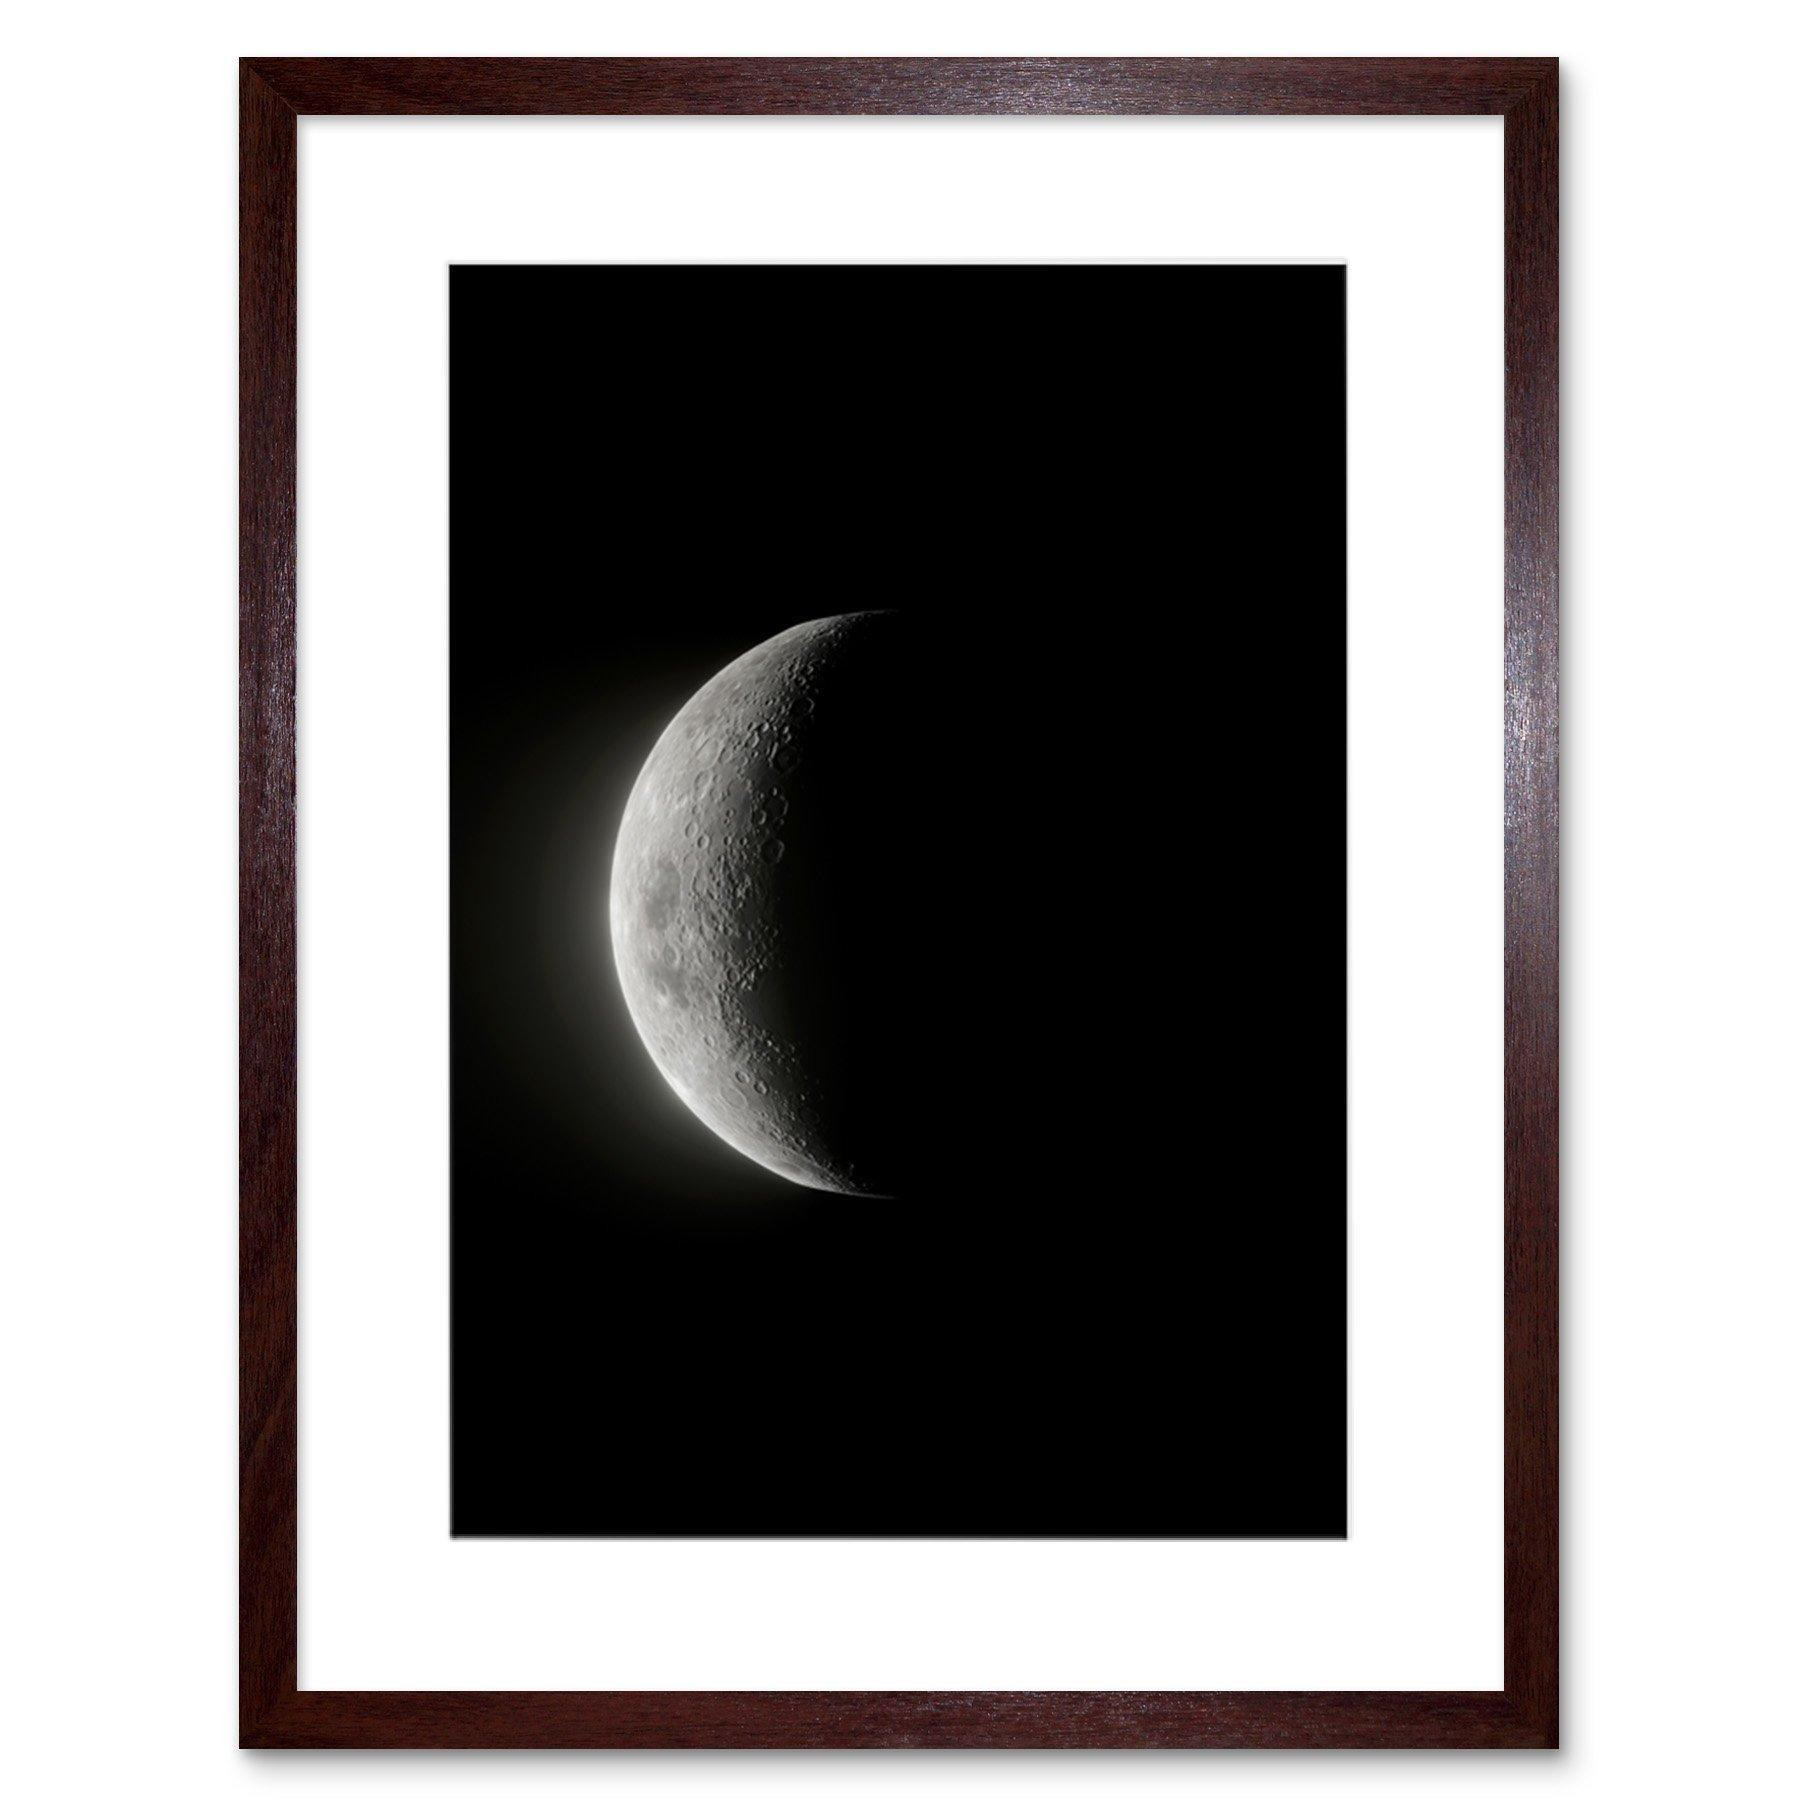 Lunar Phases Moon Waning Crescent Space Astronomy Artwork Framed Wall Art Print 9X7 Inch - image 1